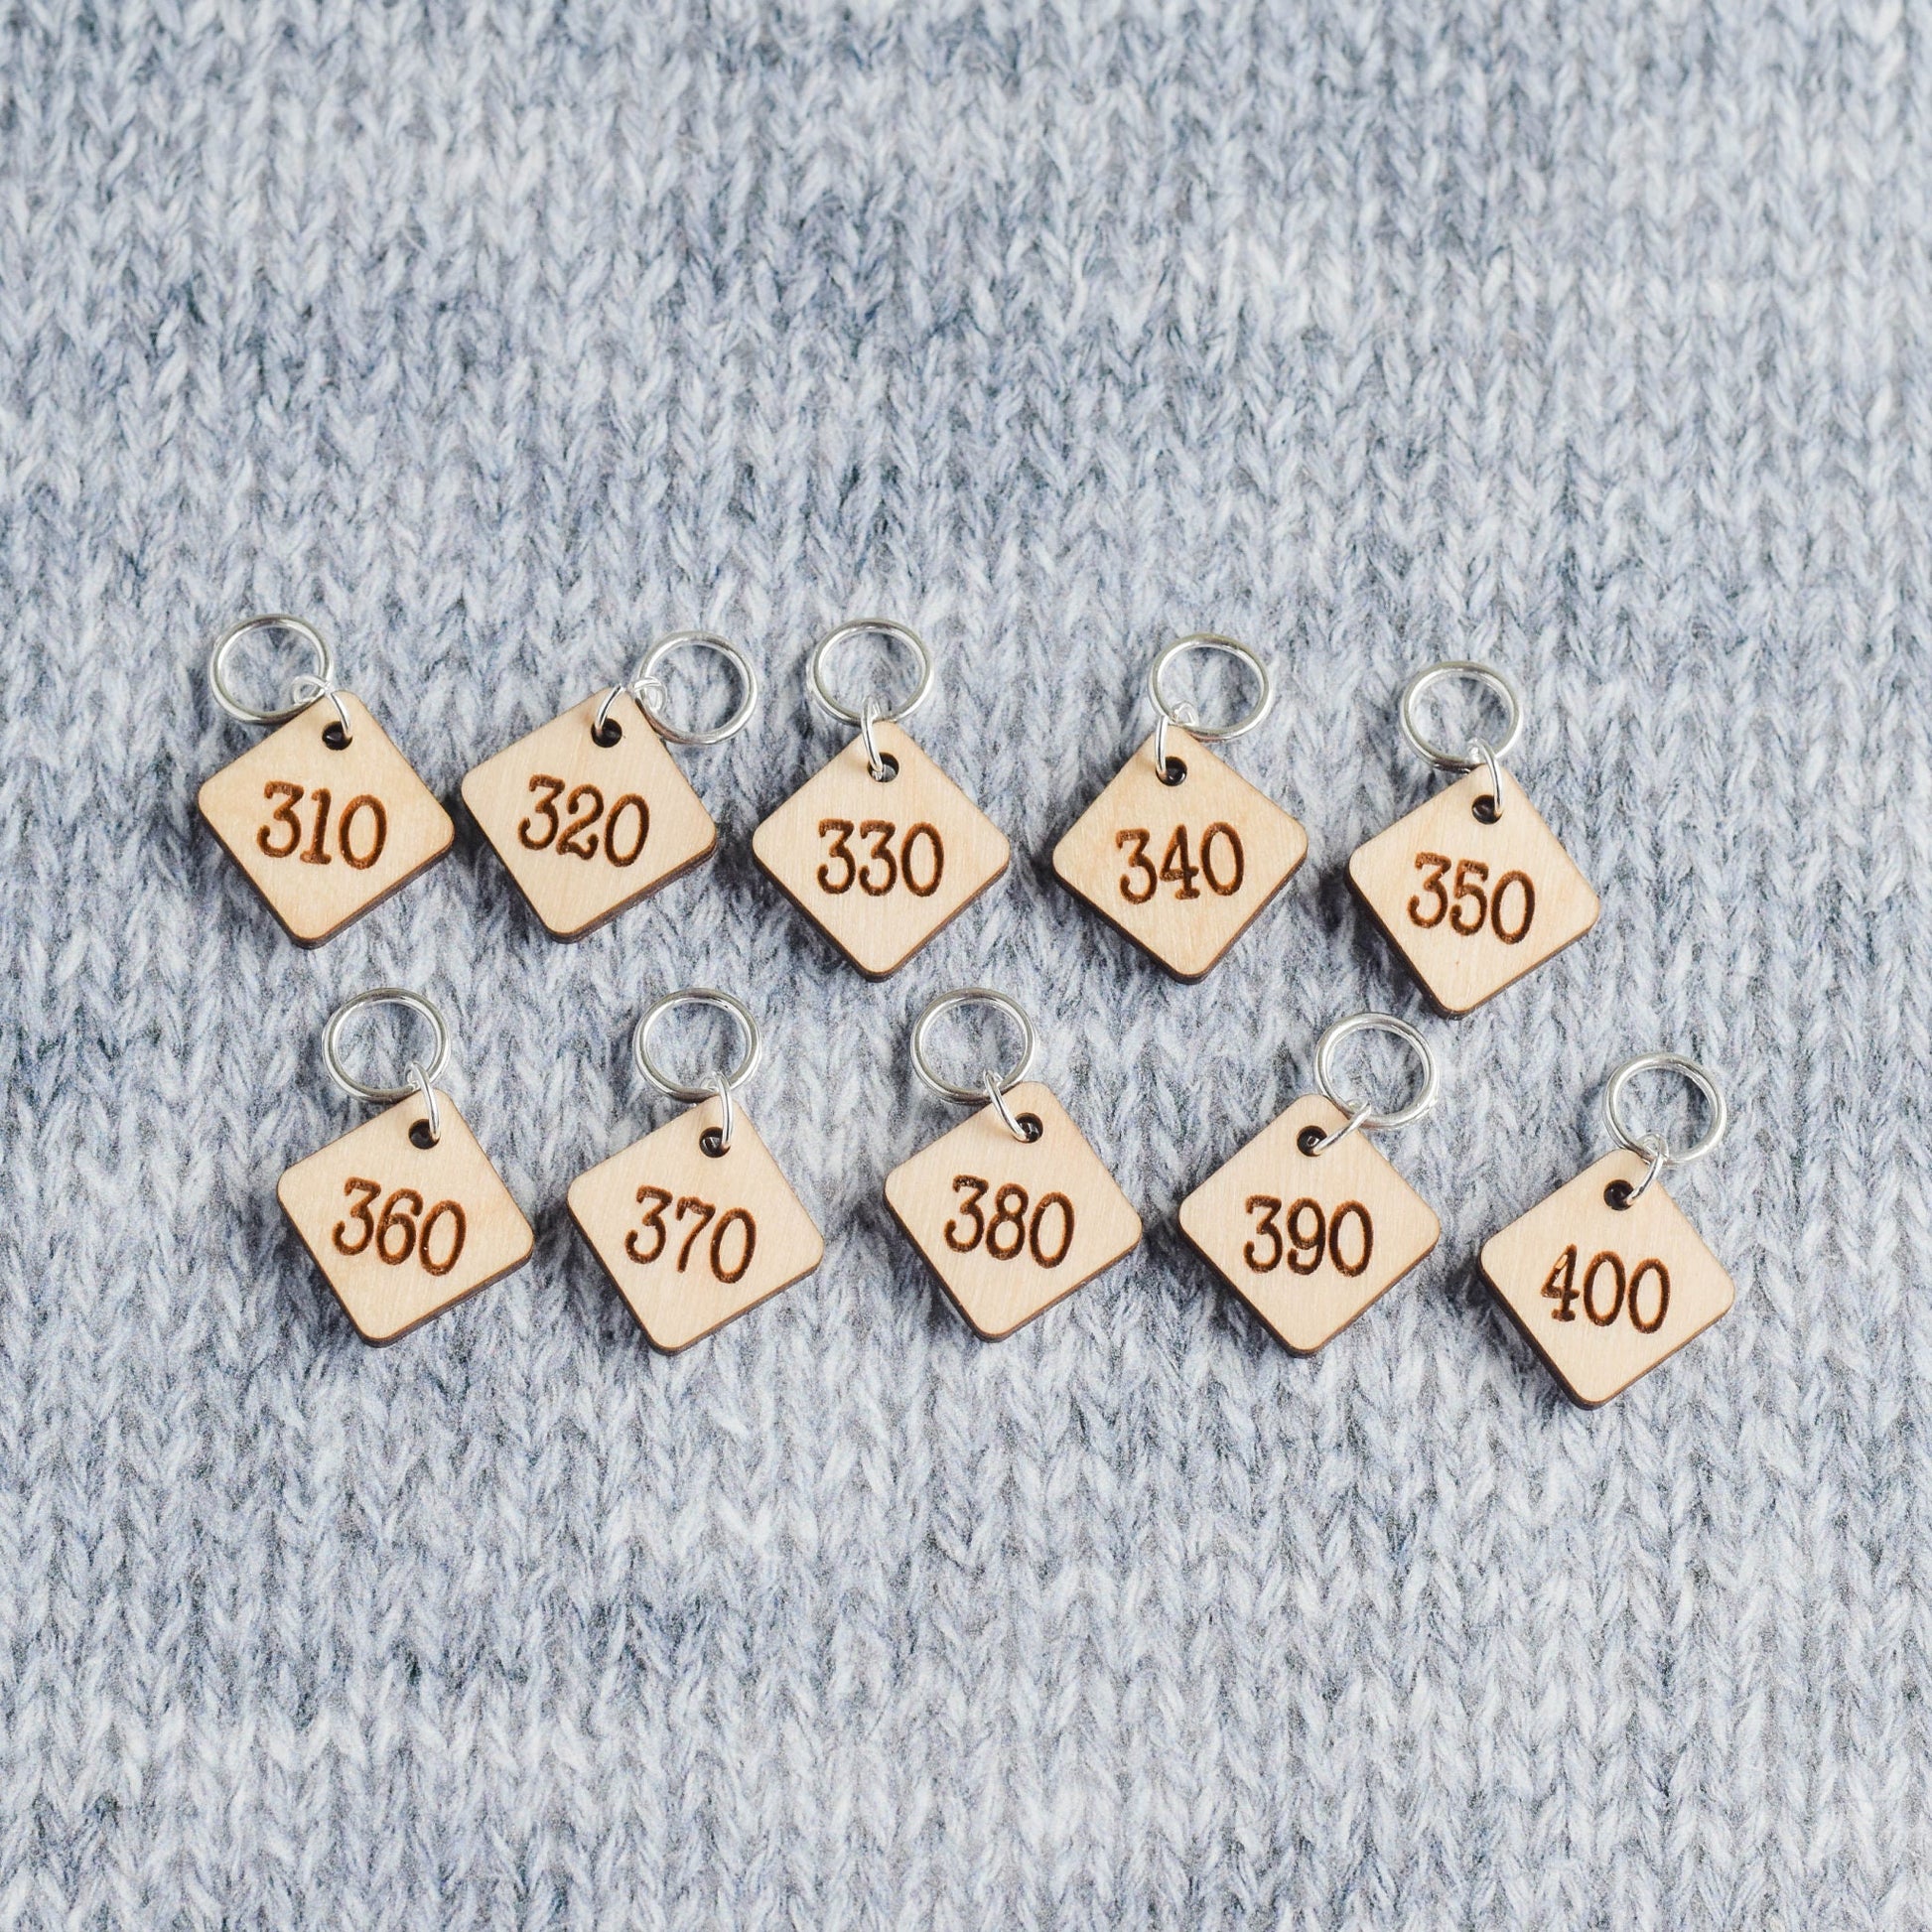 Set of 10 Stitch Markers - 310-400 - Cast On Counting Numbers, Laser Engraved Wood Stitch Markers, Counting Stitch Markers